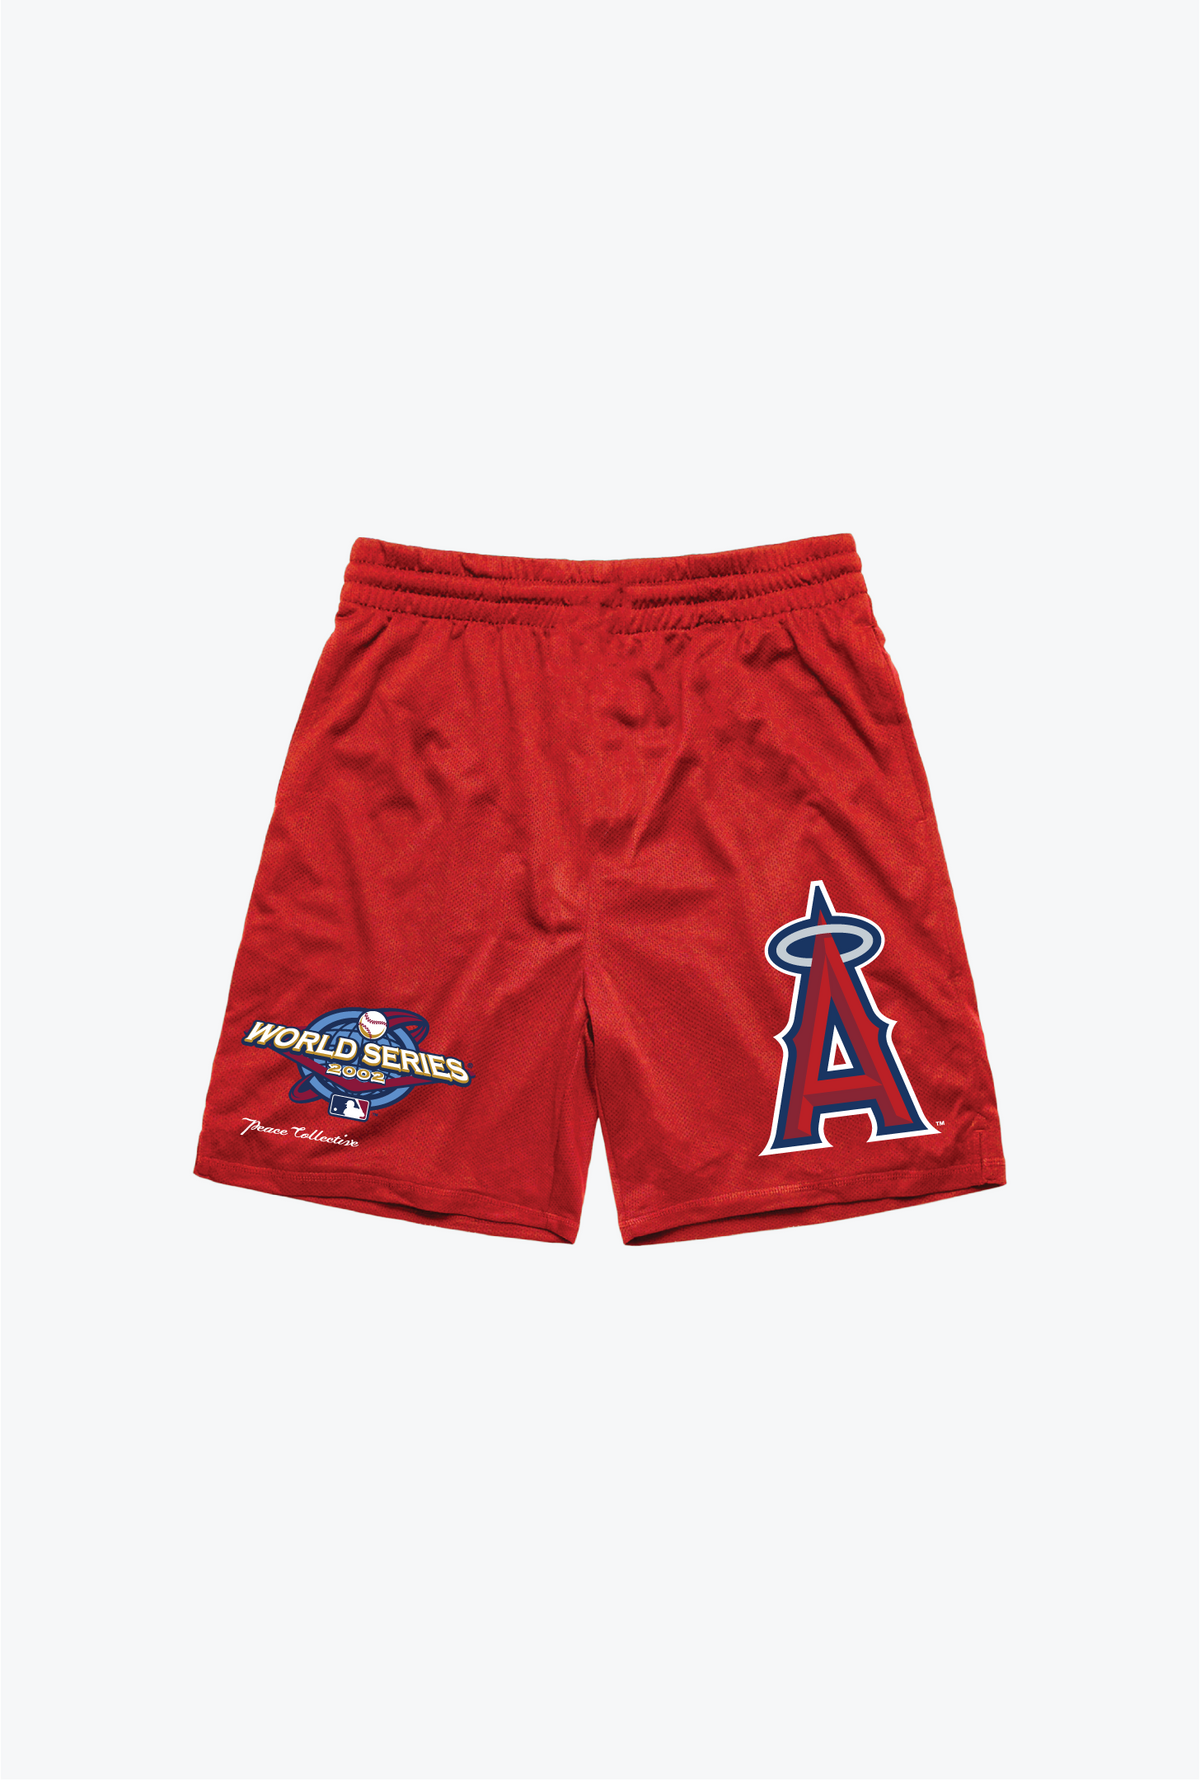 Los Angeles Angels 2002 World Series Mesh Shorts - Red